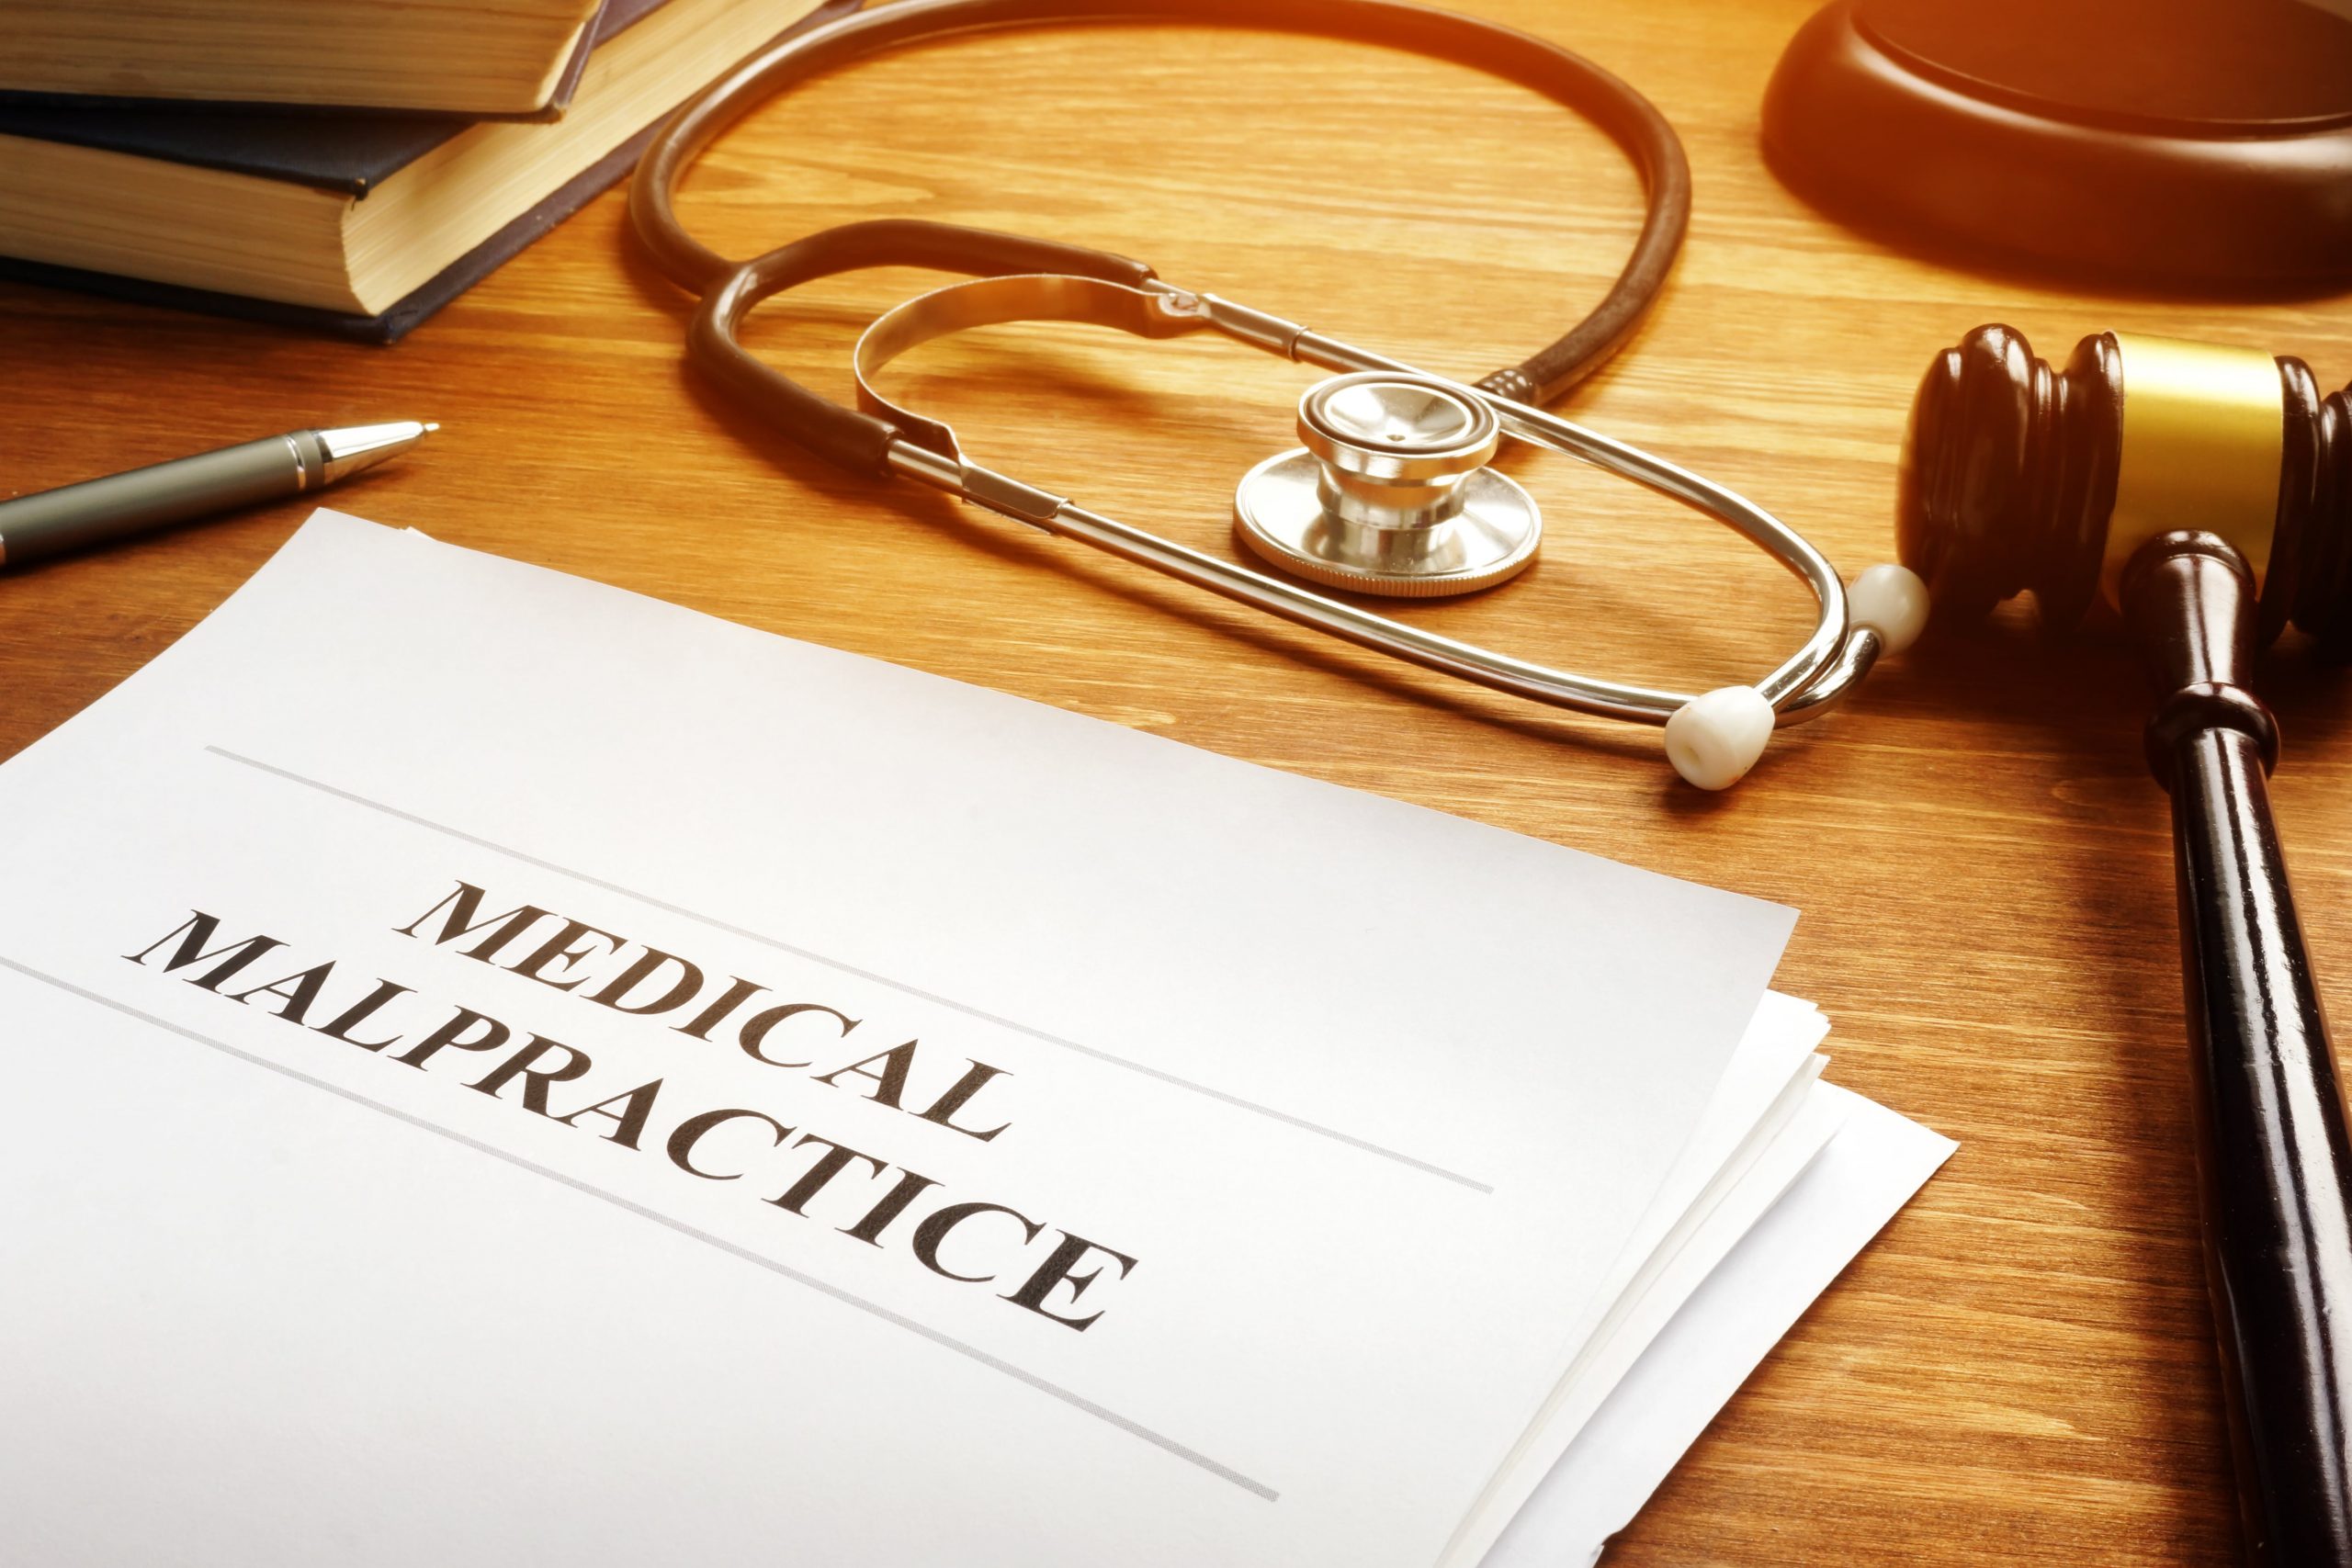 Medical malpractice report documents and the stethoscope.